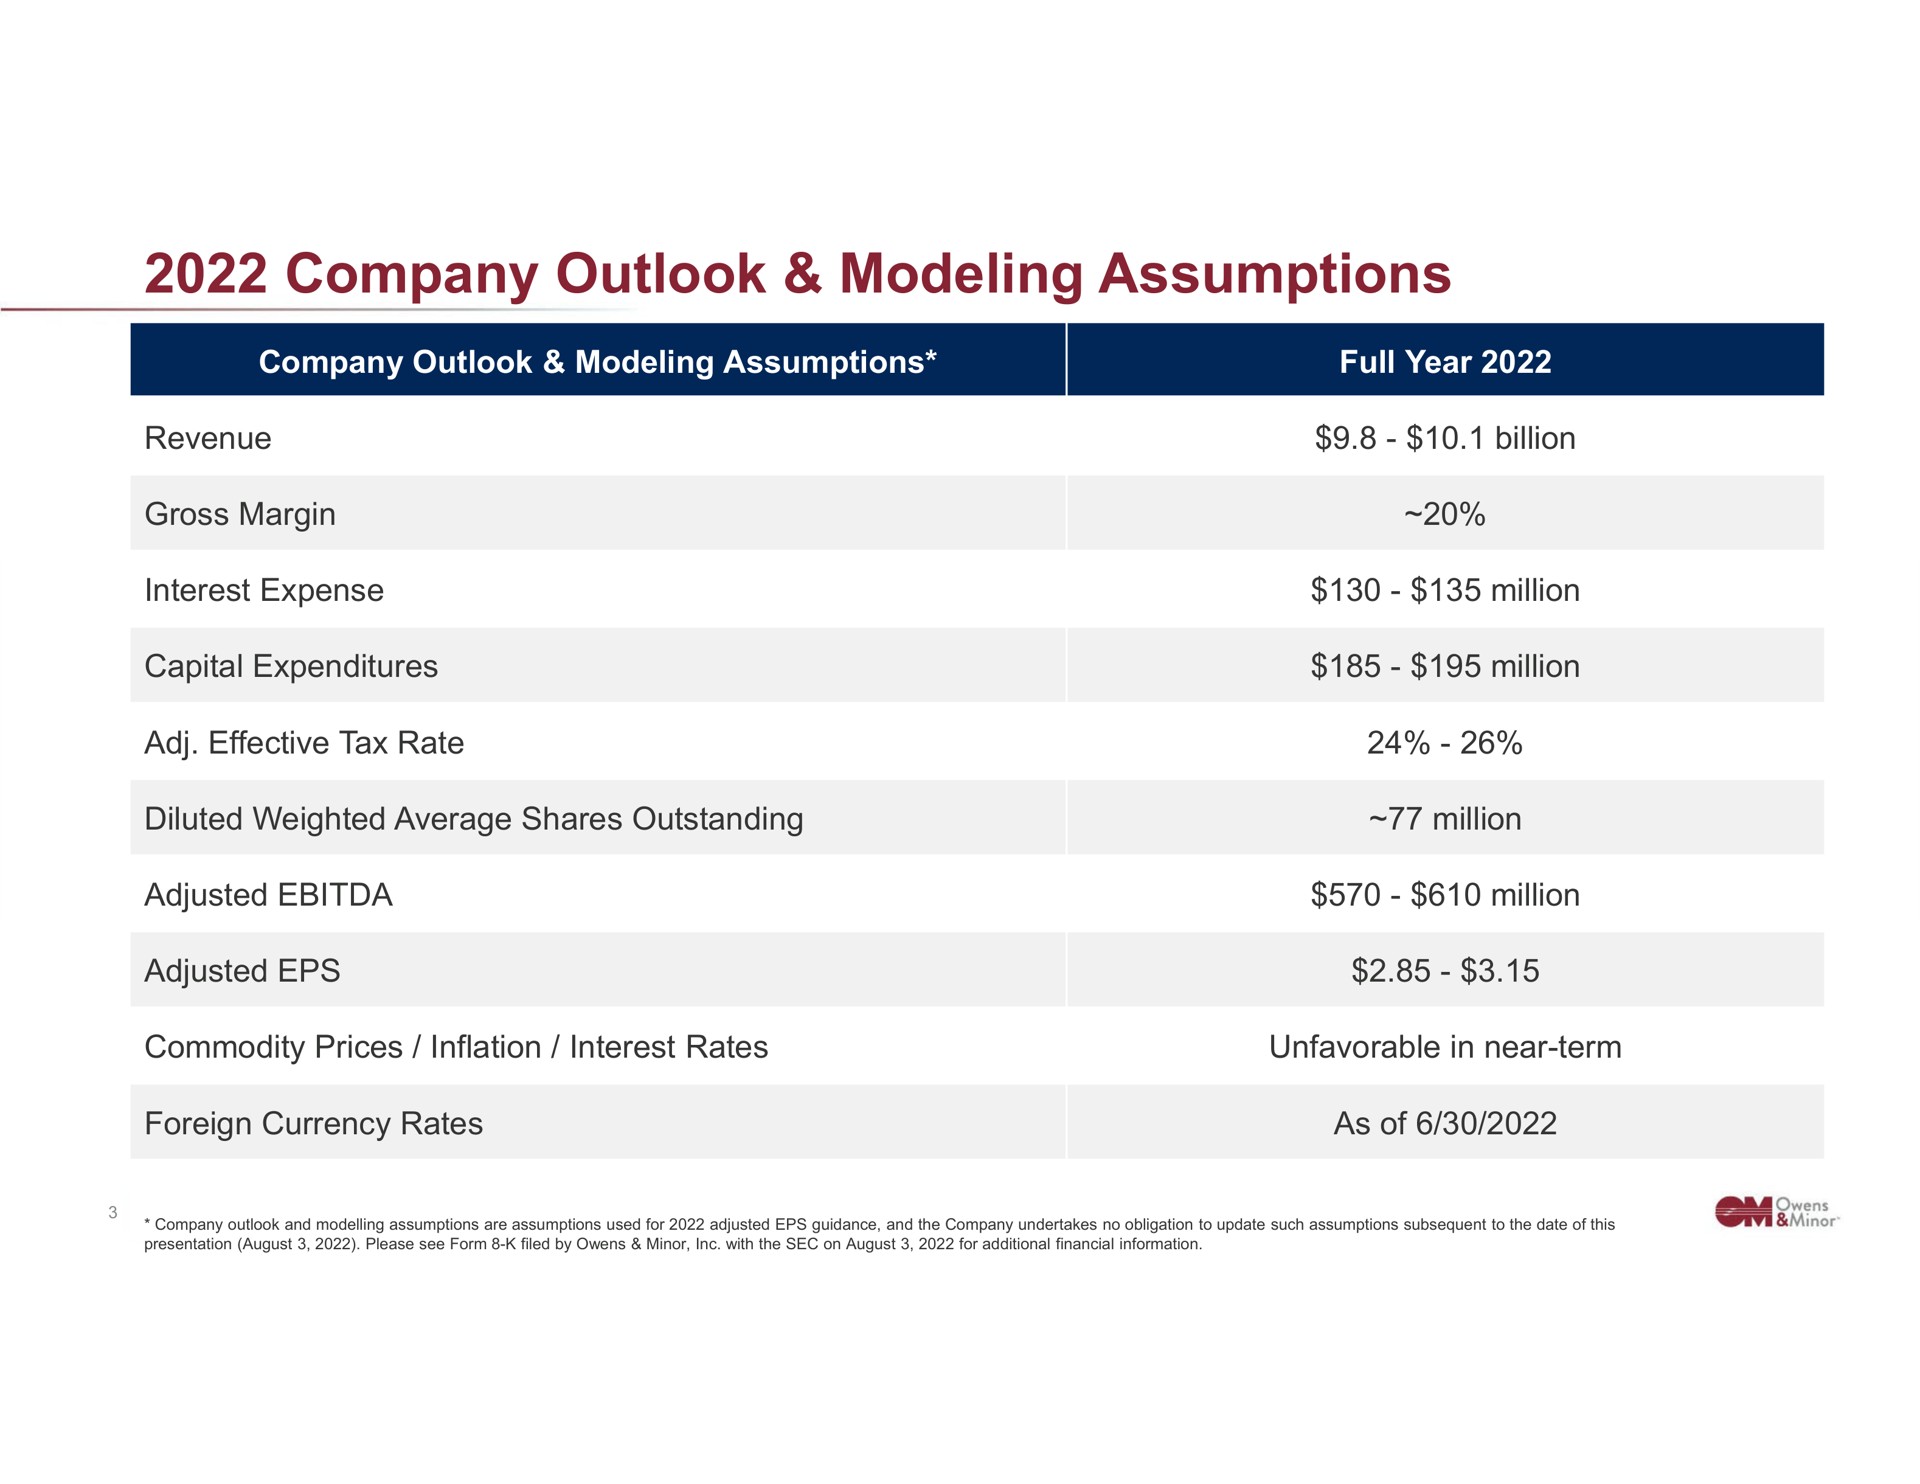 company outlook modeling assumptions and are used for adjusted guidance undertakes no to update such subsequent date | Owens&Minor